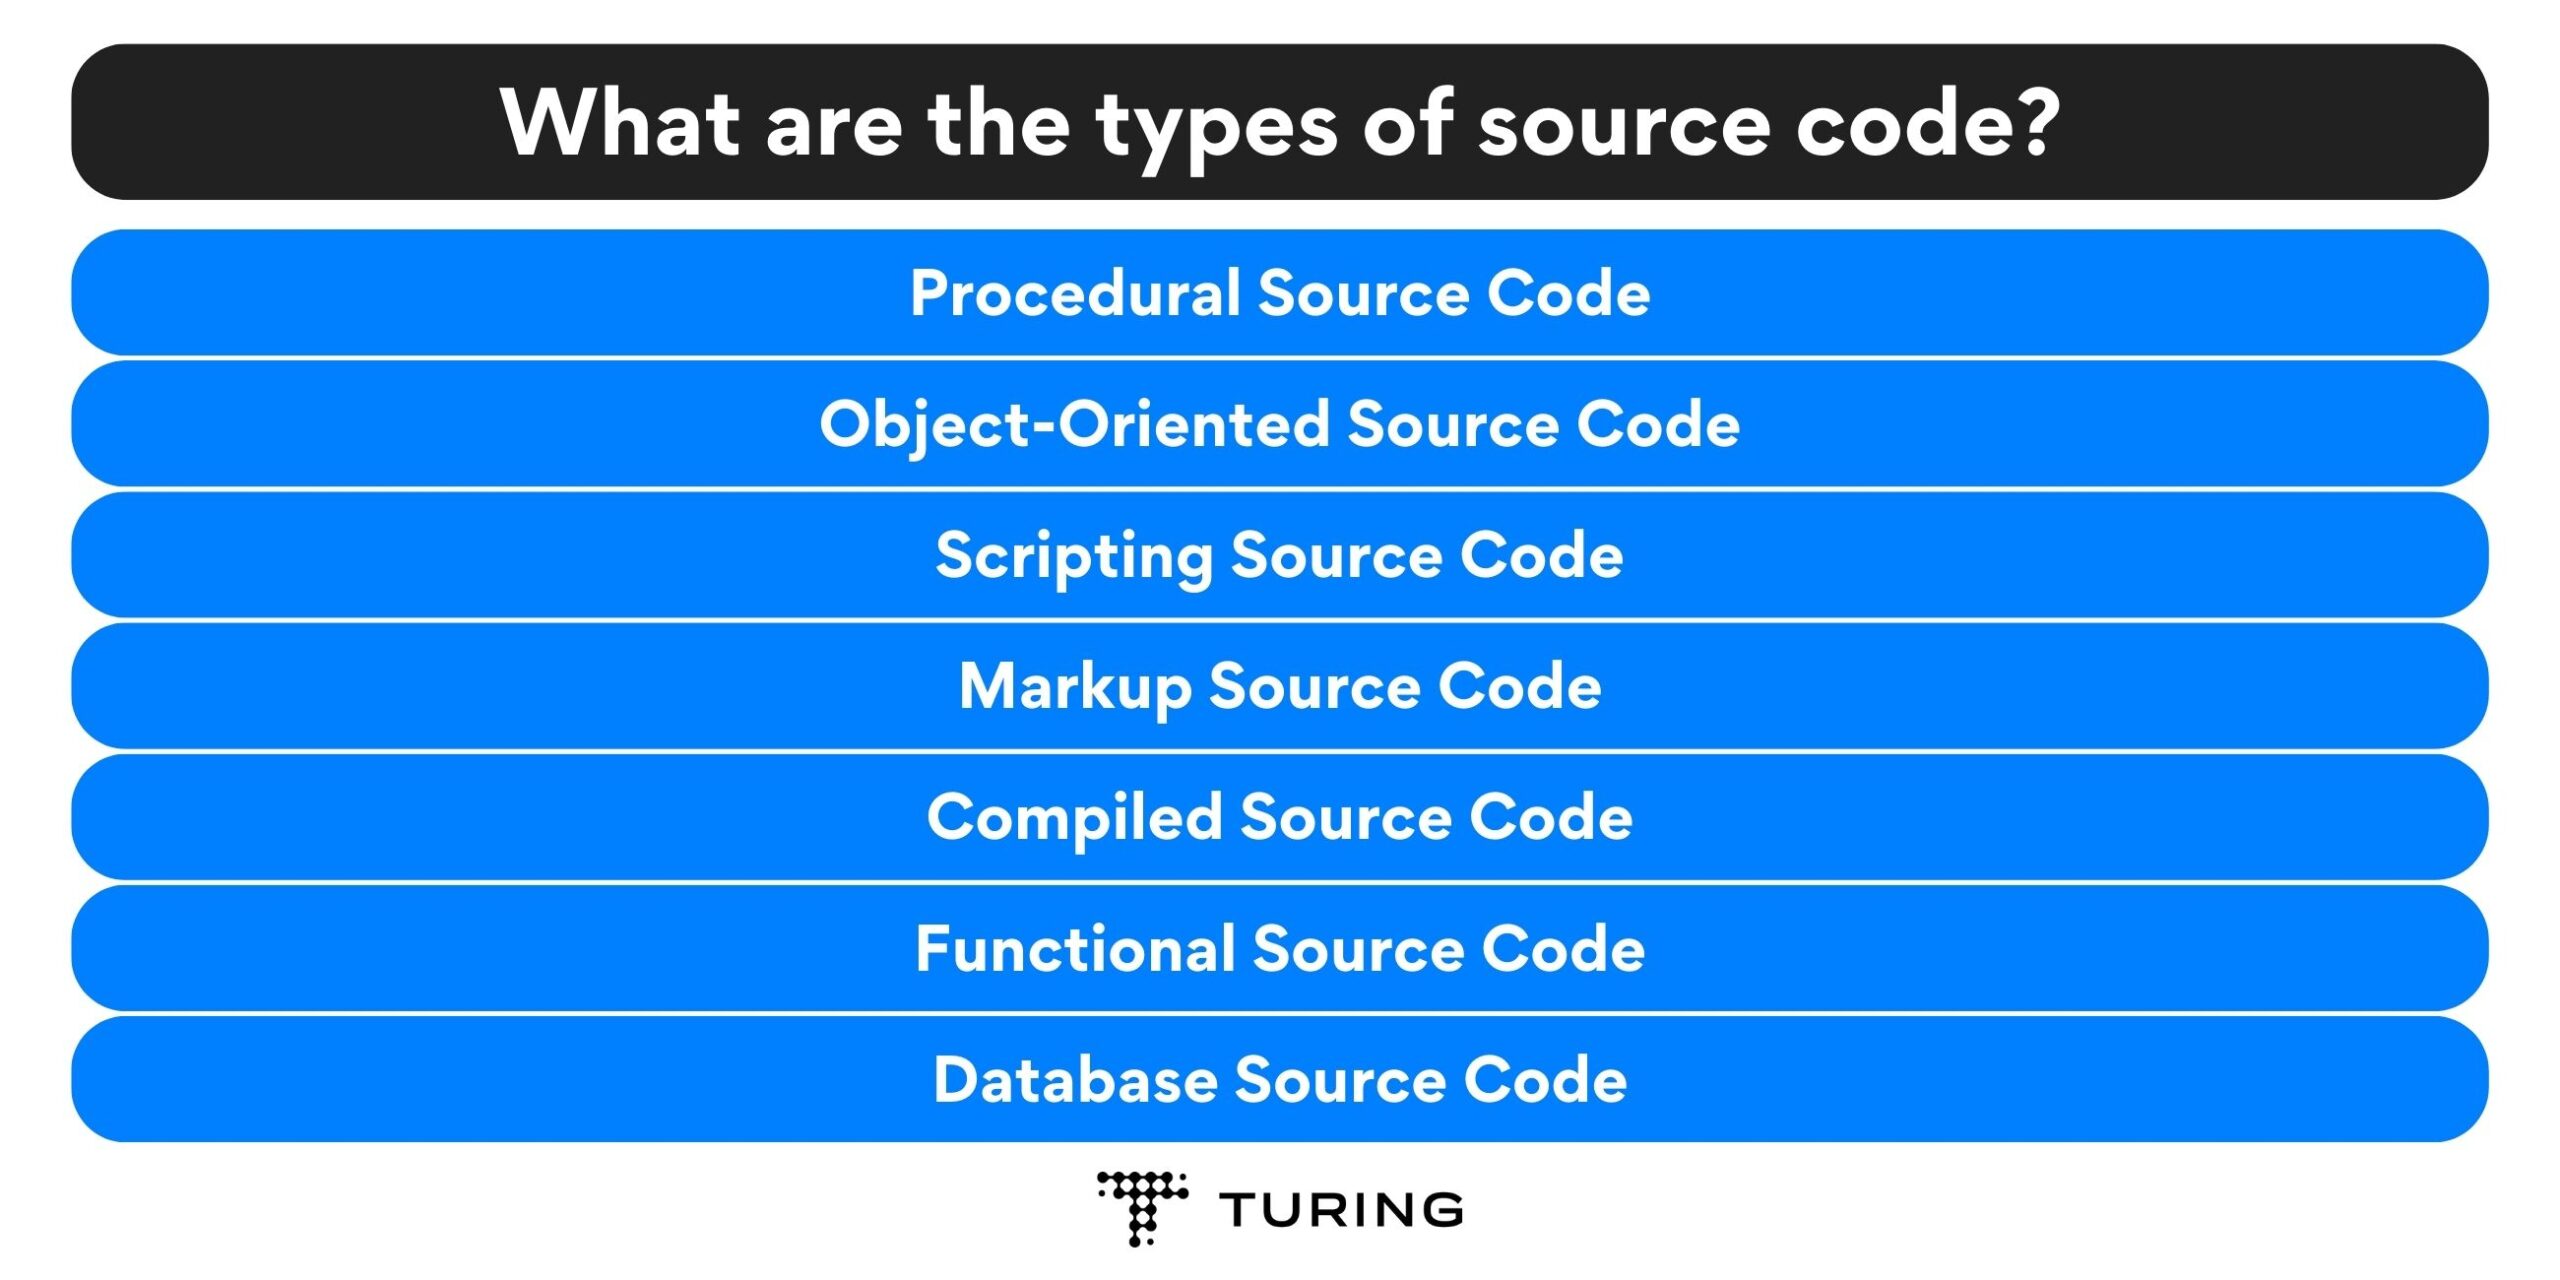 What are the types of source code? 